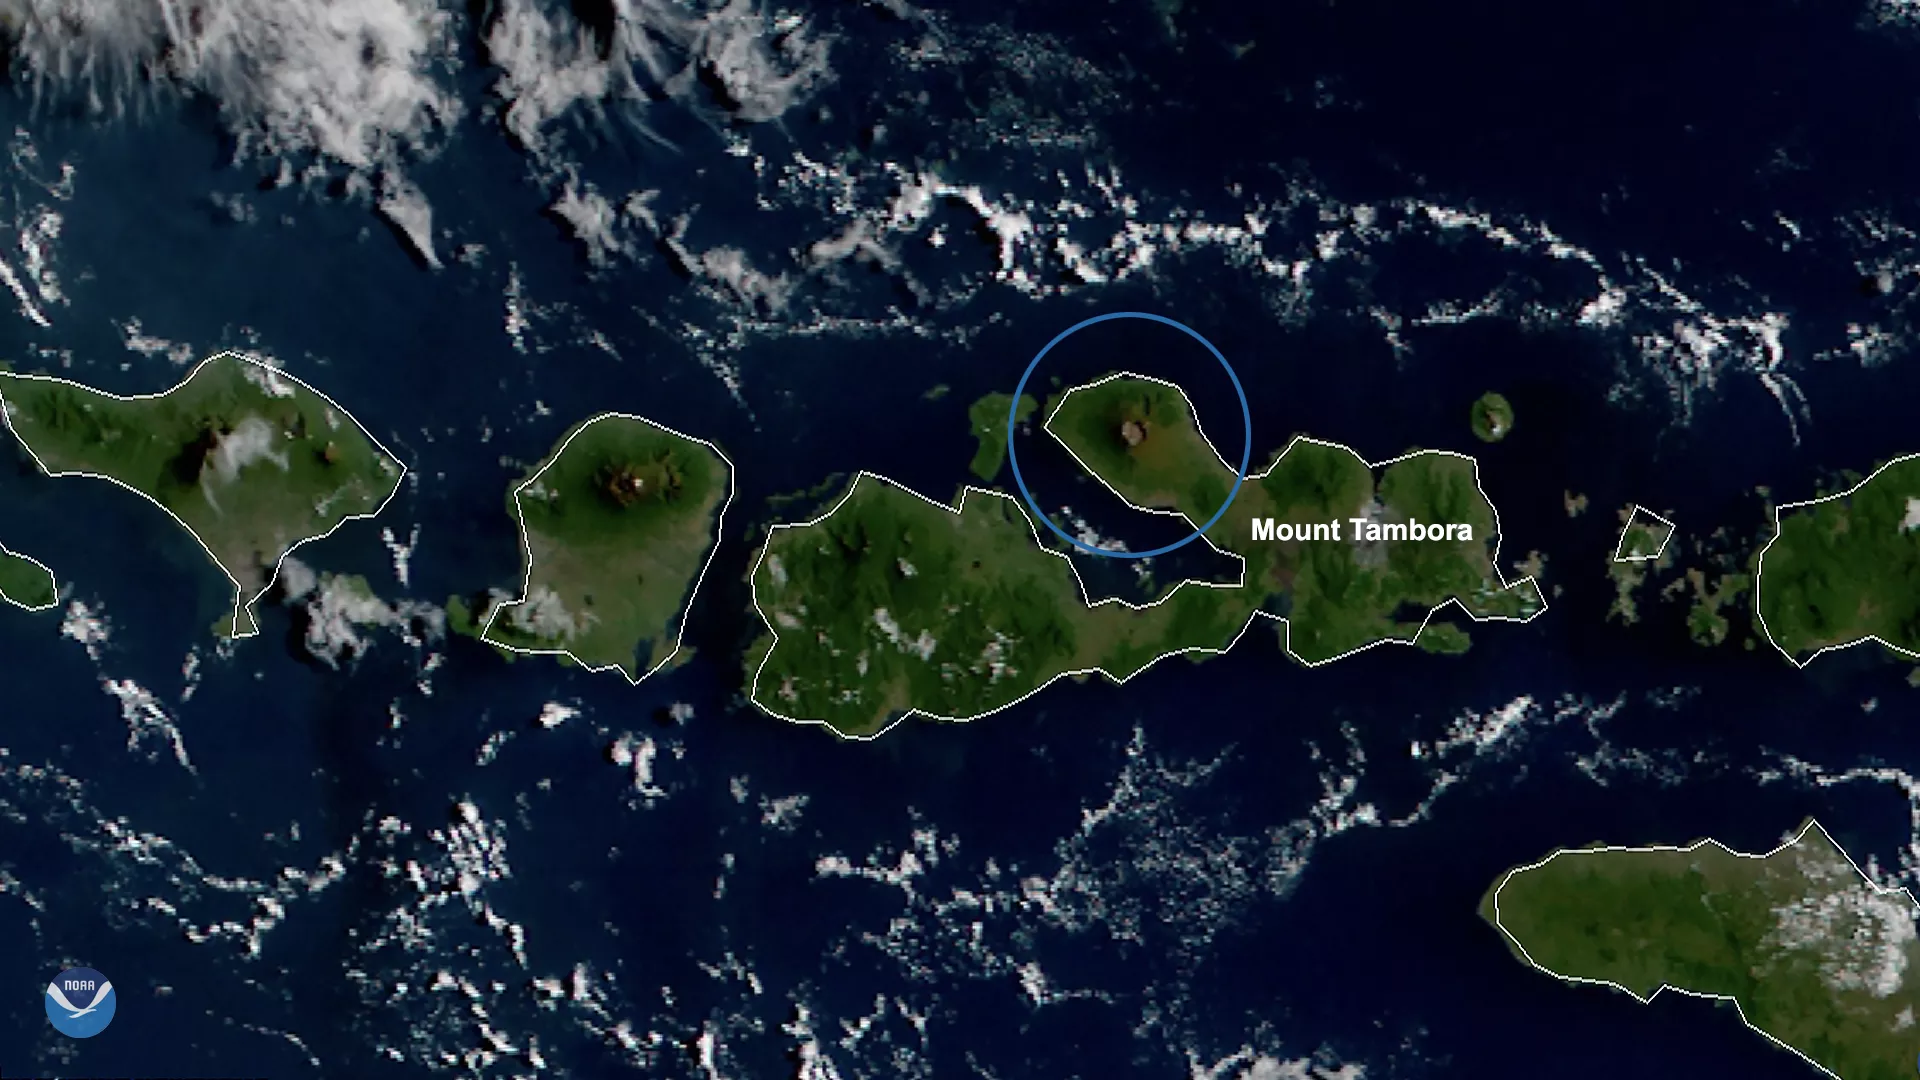 Green islands of Indonesia shown surrounded by dark blue ocean with white clouds above. Mount Tambora is circled in blue. 